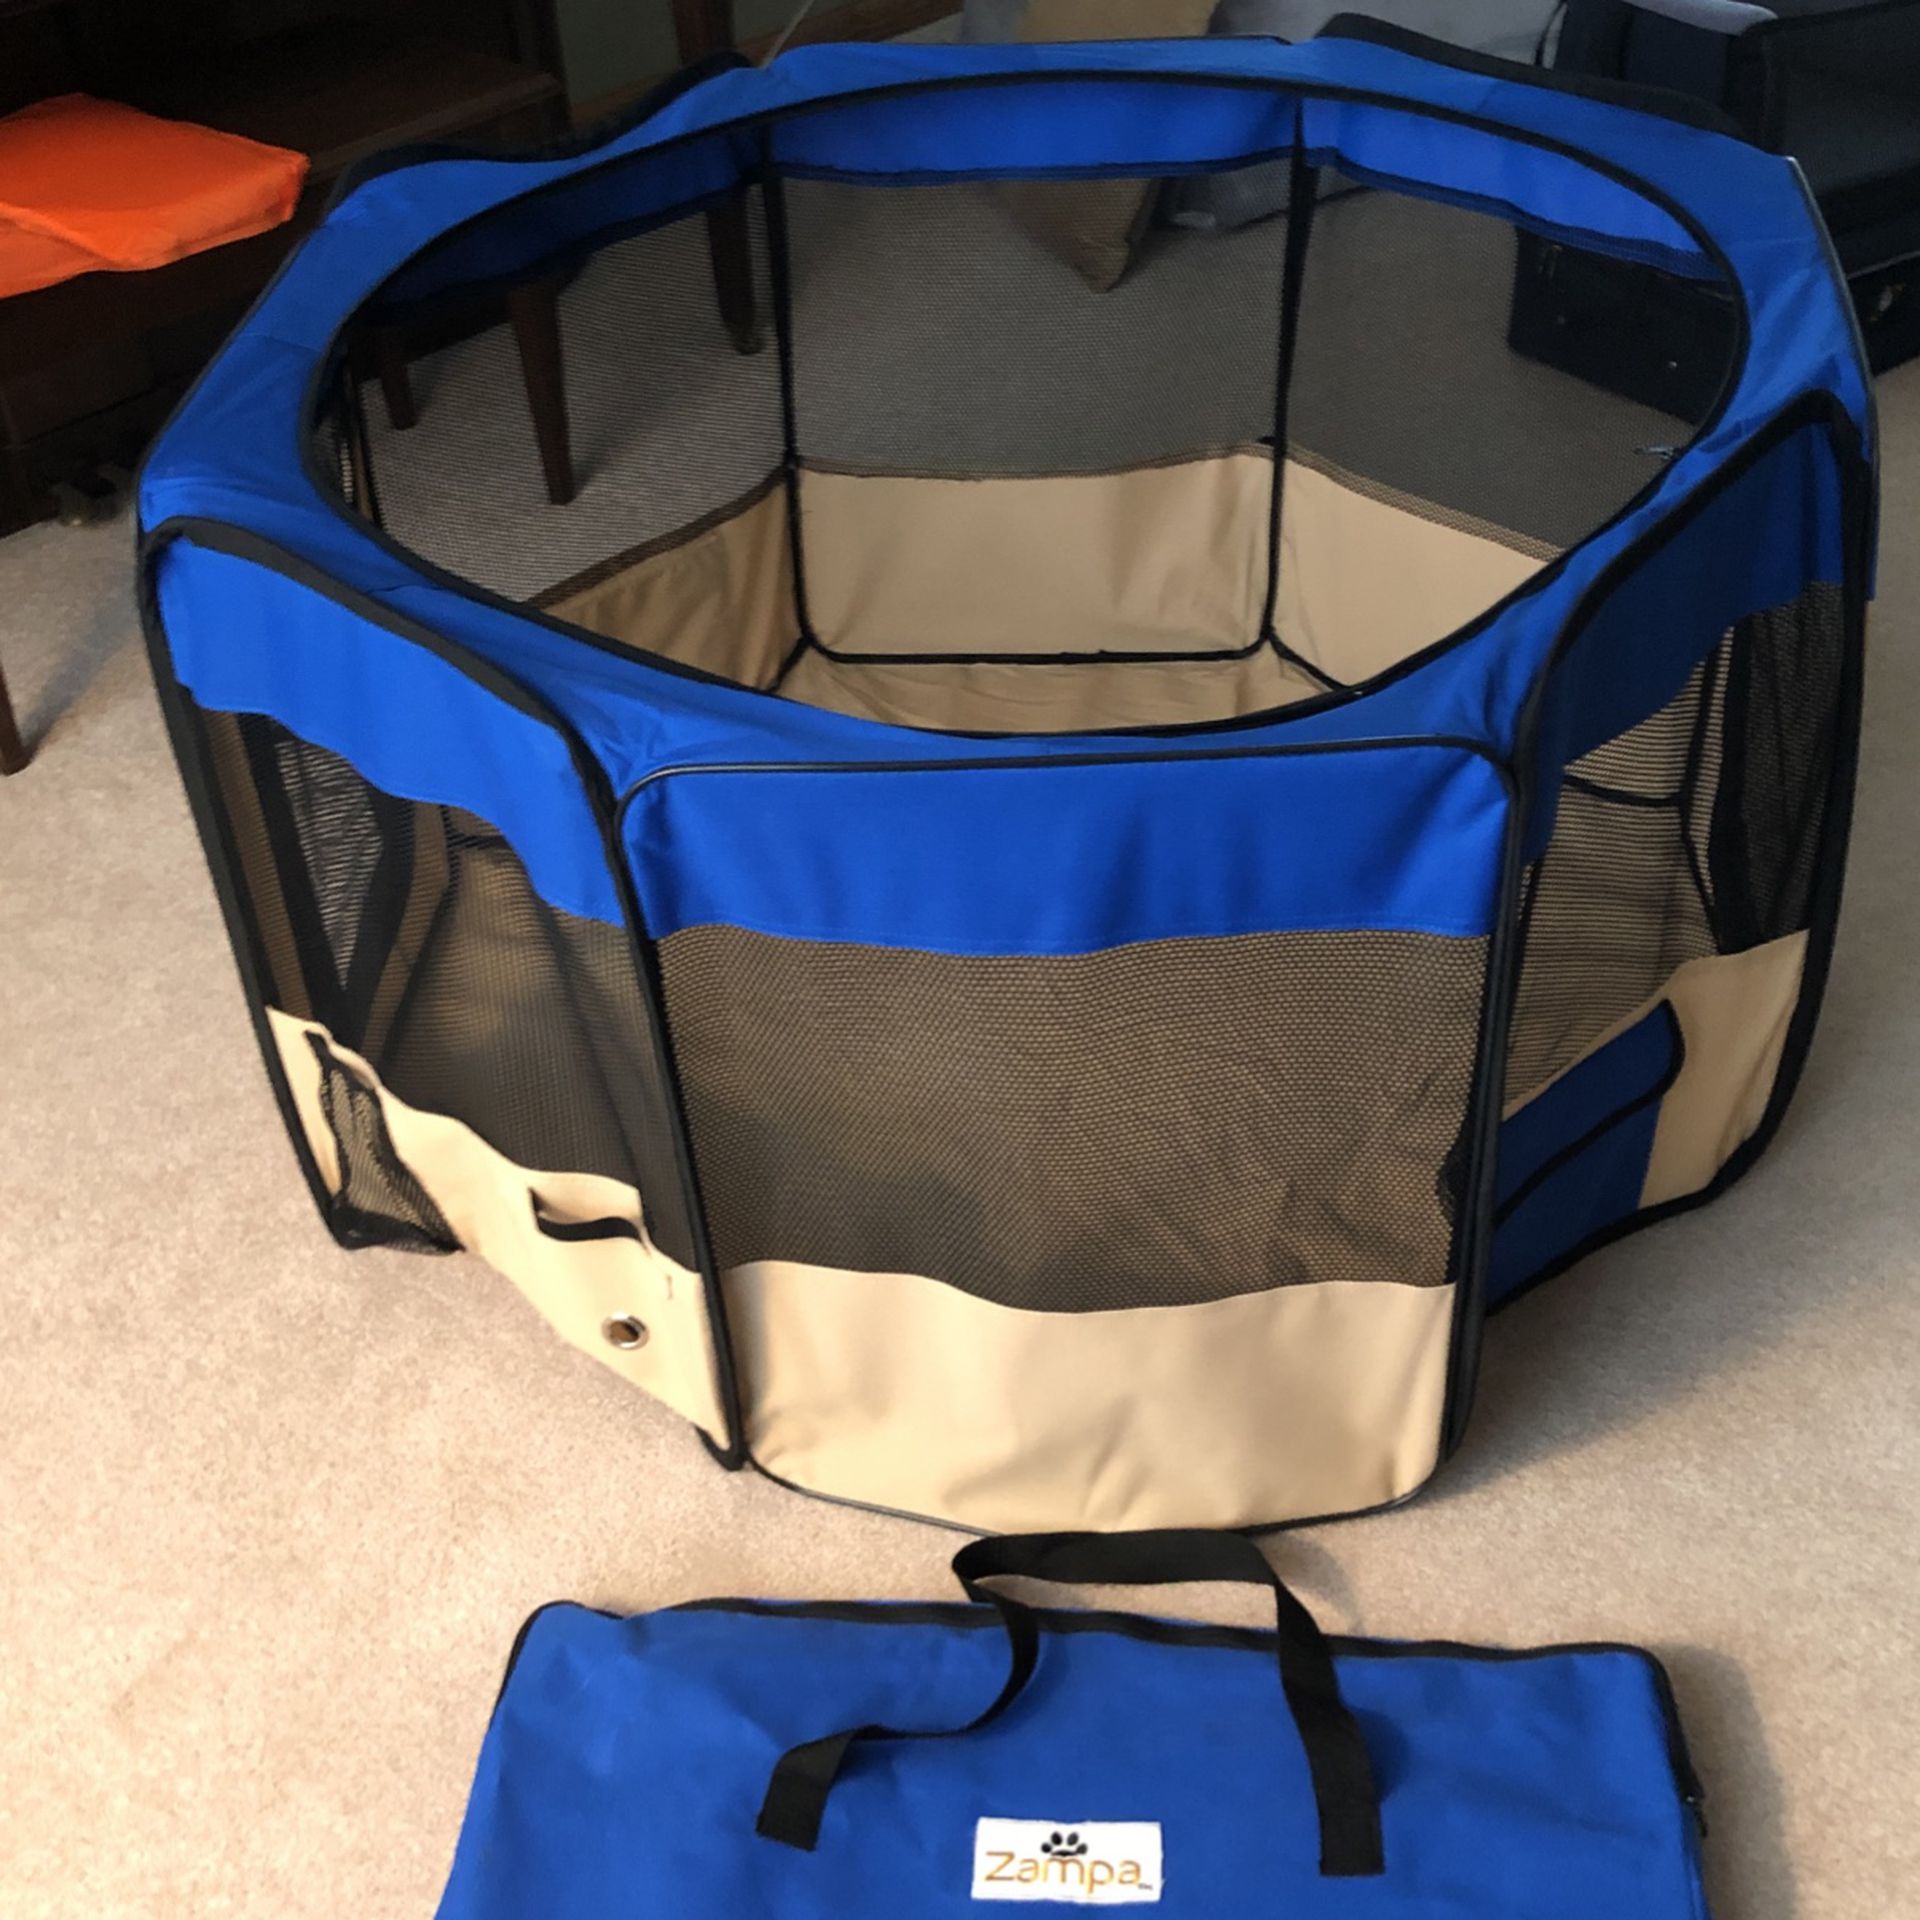 Zampa Fabric Dog Pen. 19 In Tall And 38 In Wide. Folds Down Has Mesh Zip Top And 2 Dog Doors! Comes With Carry Case To Fold And Pack Away.